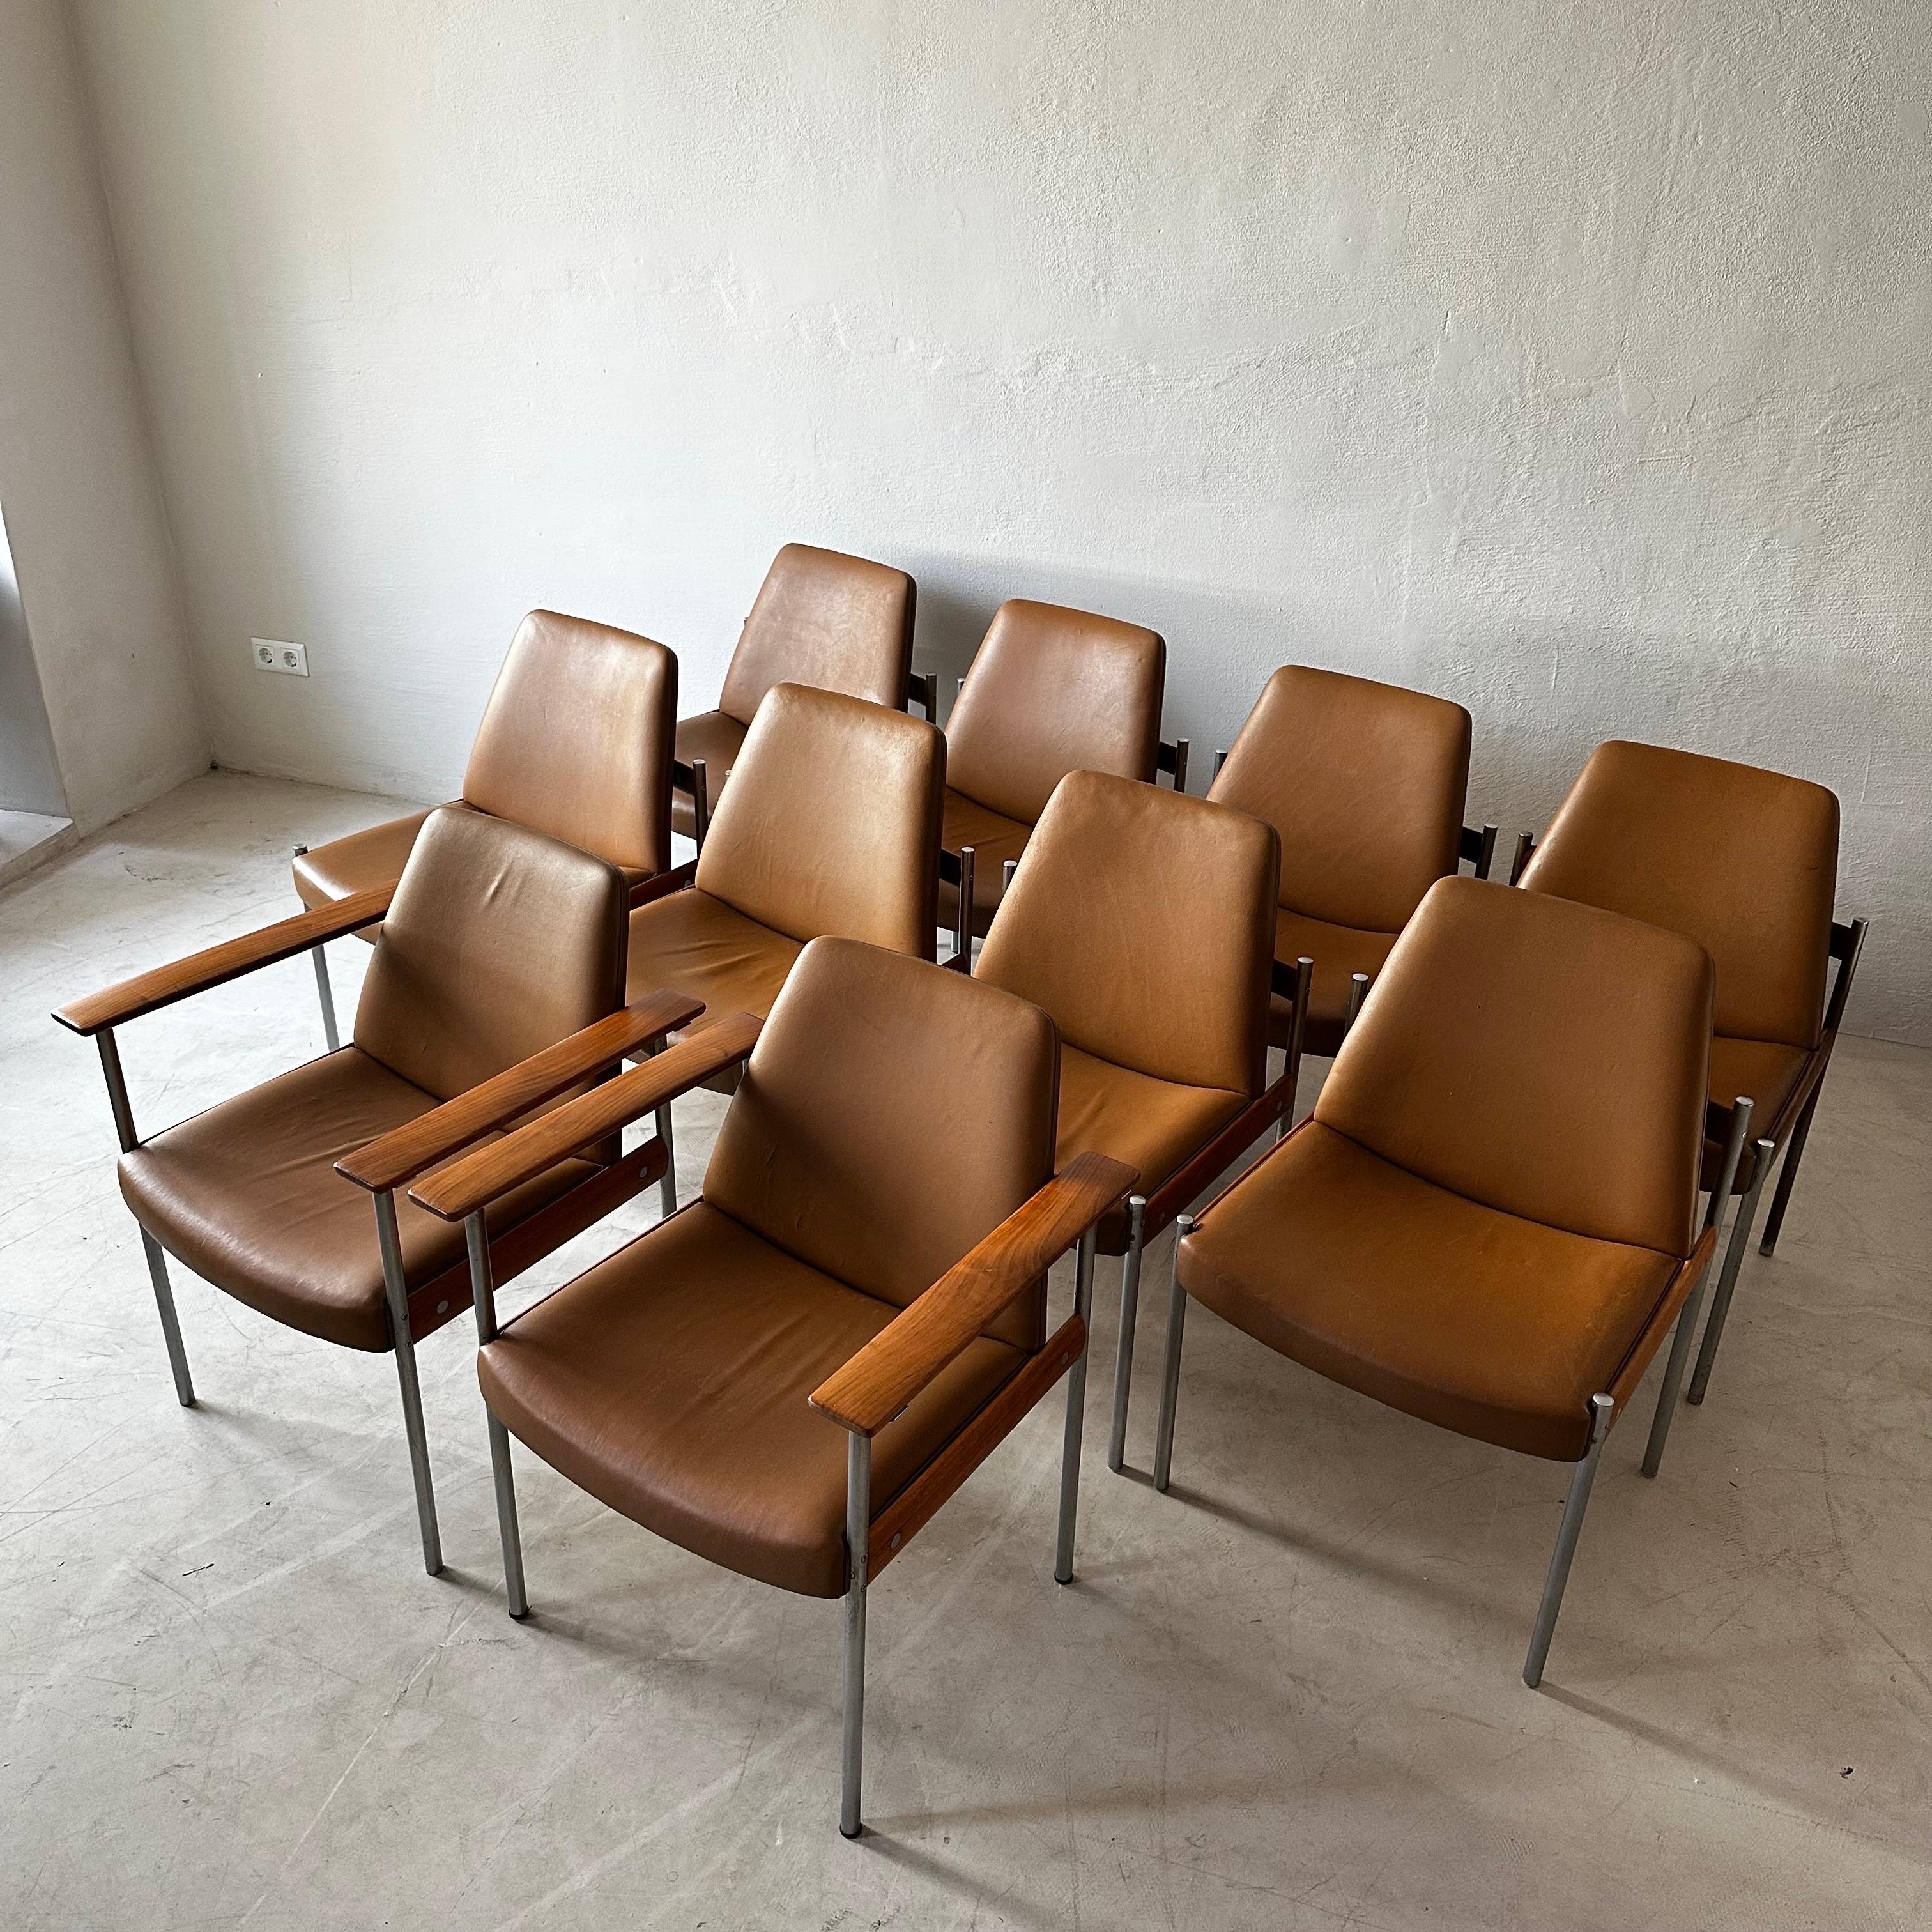 Sven Ivar Dysthe for Dokka Møbler, 10 dining chairs, cognac leather, steel, walnut, Norway, circa 1960. Two chairs come with arm rests, eight are without. A perfect combination.

The base of these office chairs is made out of dark wood and stainless